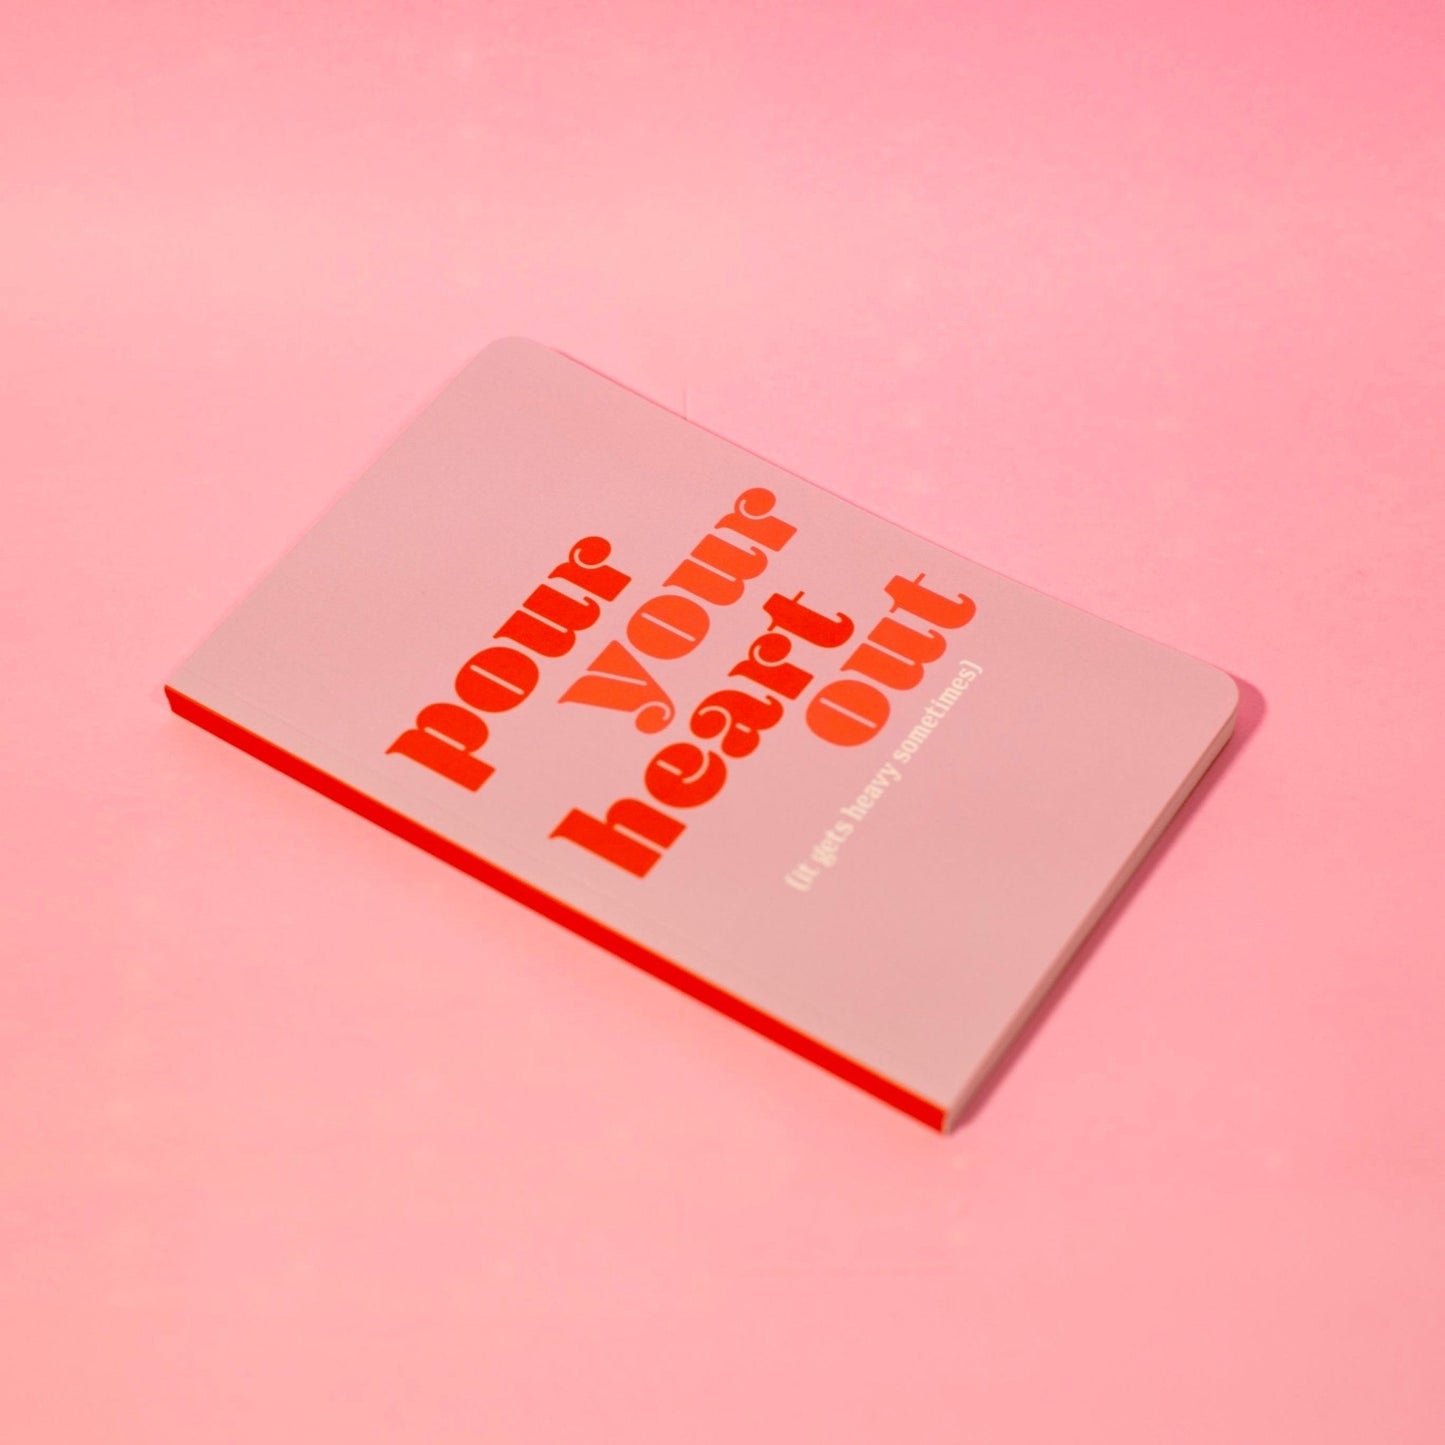 Pour Your Heart Out Journal Journal by Posse Paper Goods